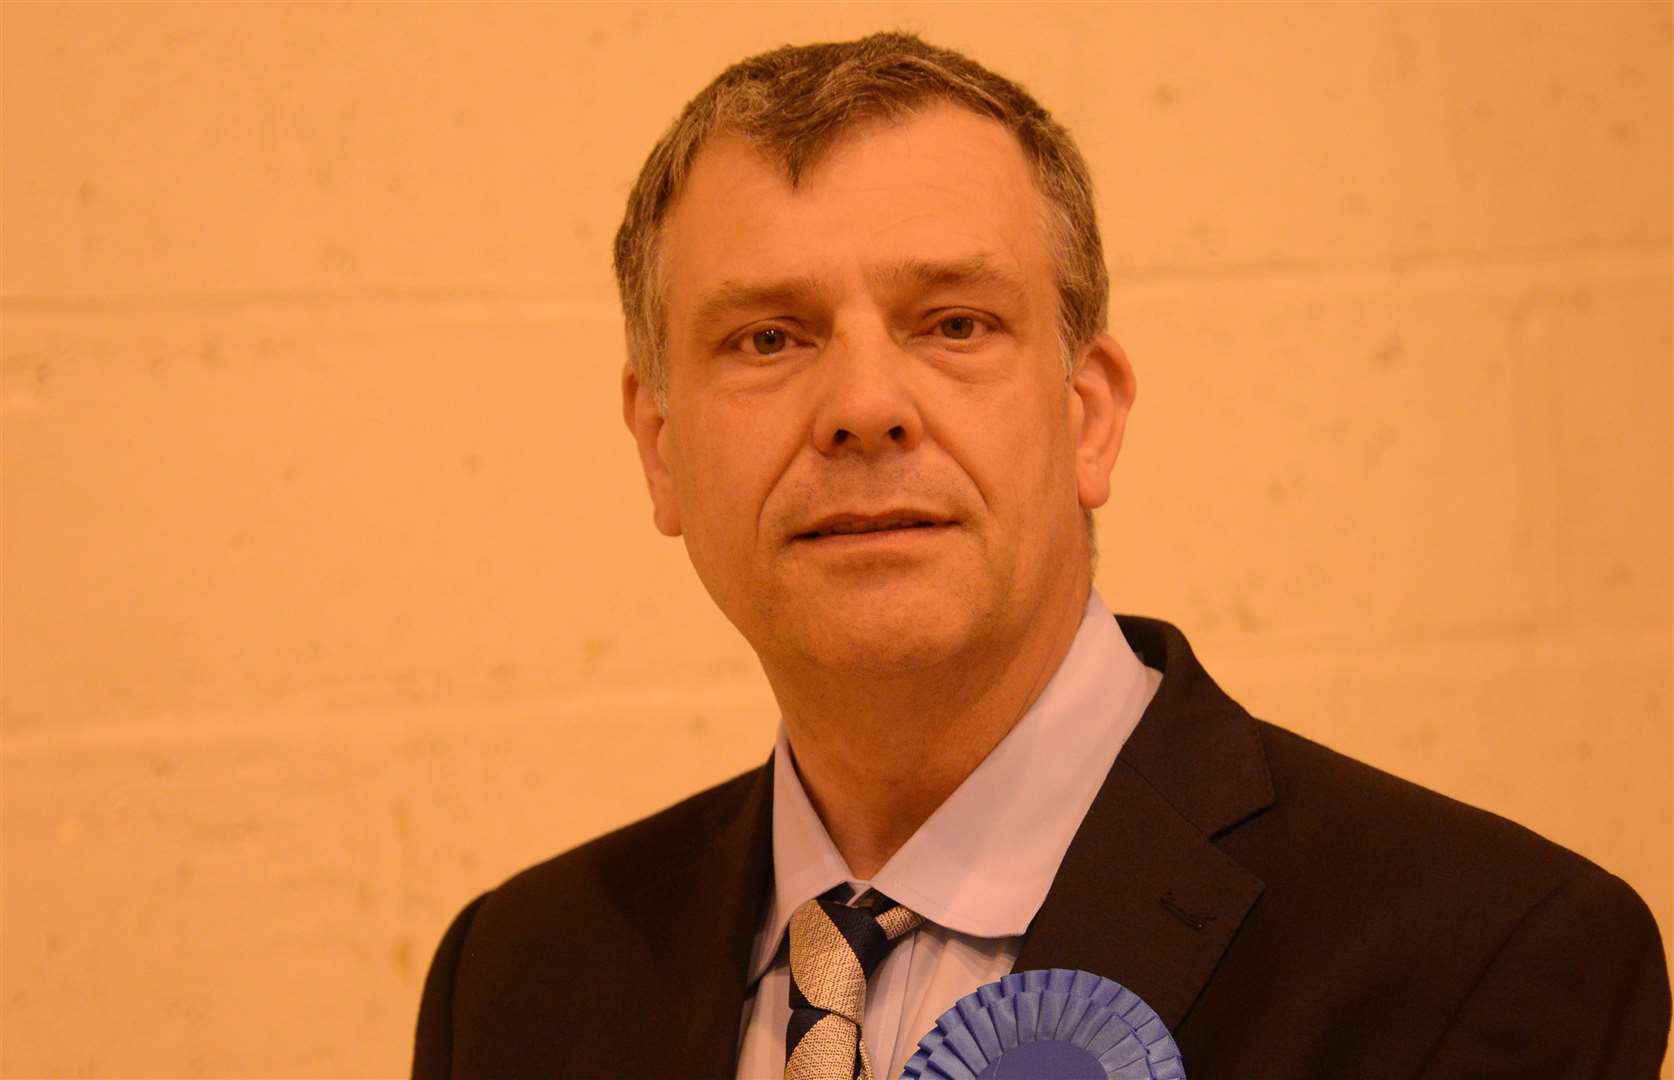 Cllr Paul Bartlett (Con) lives close to the roundabout in Sevington